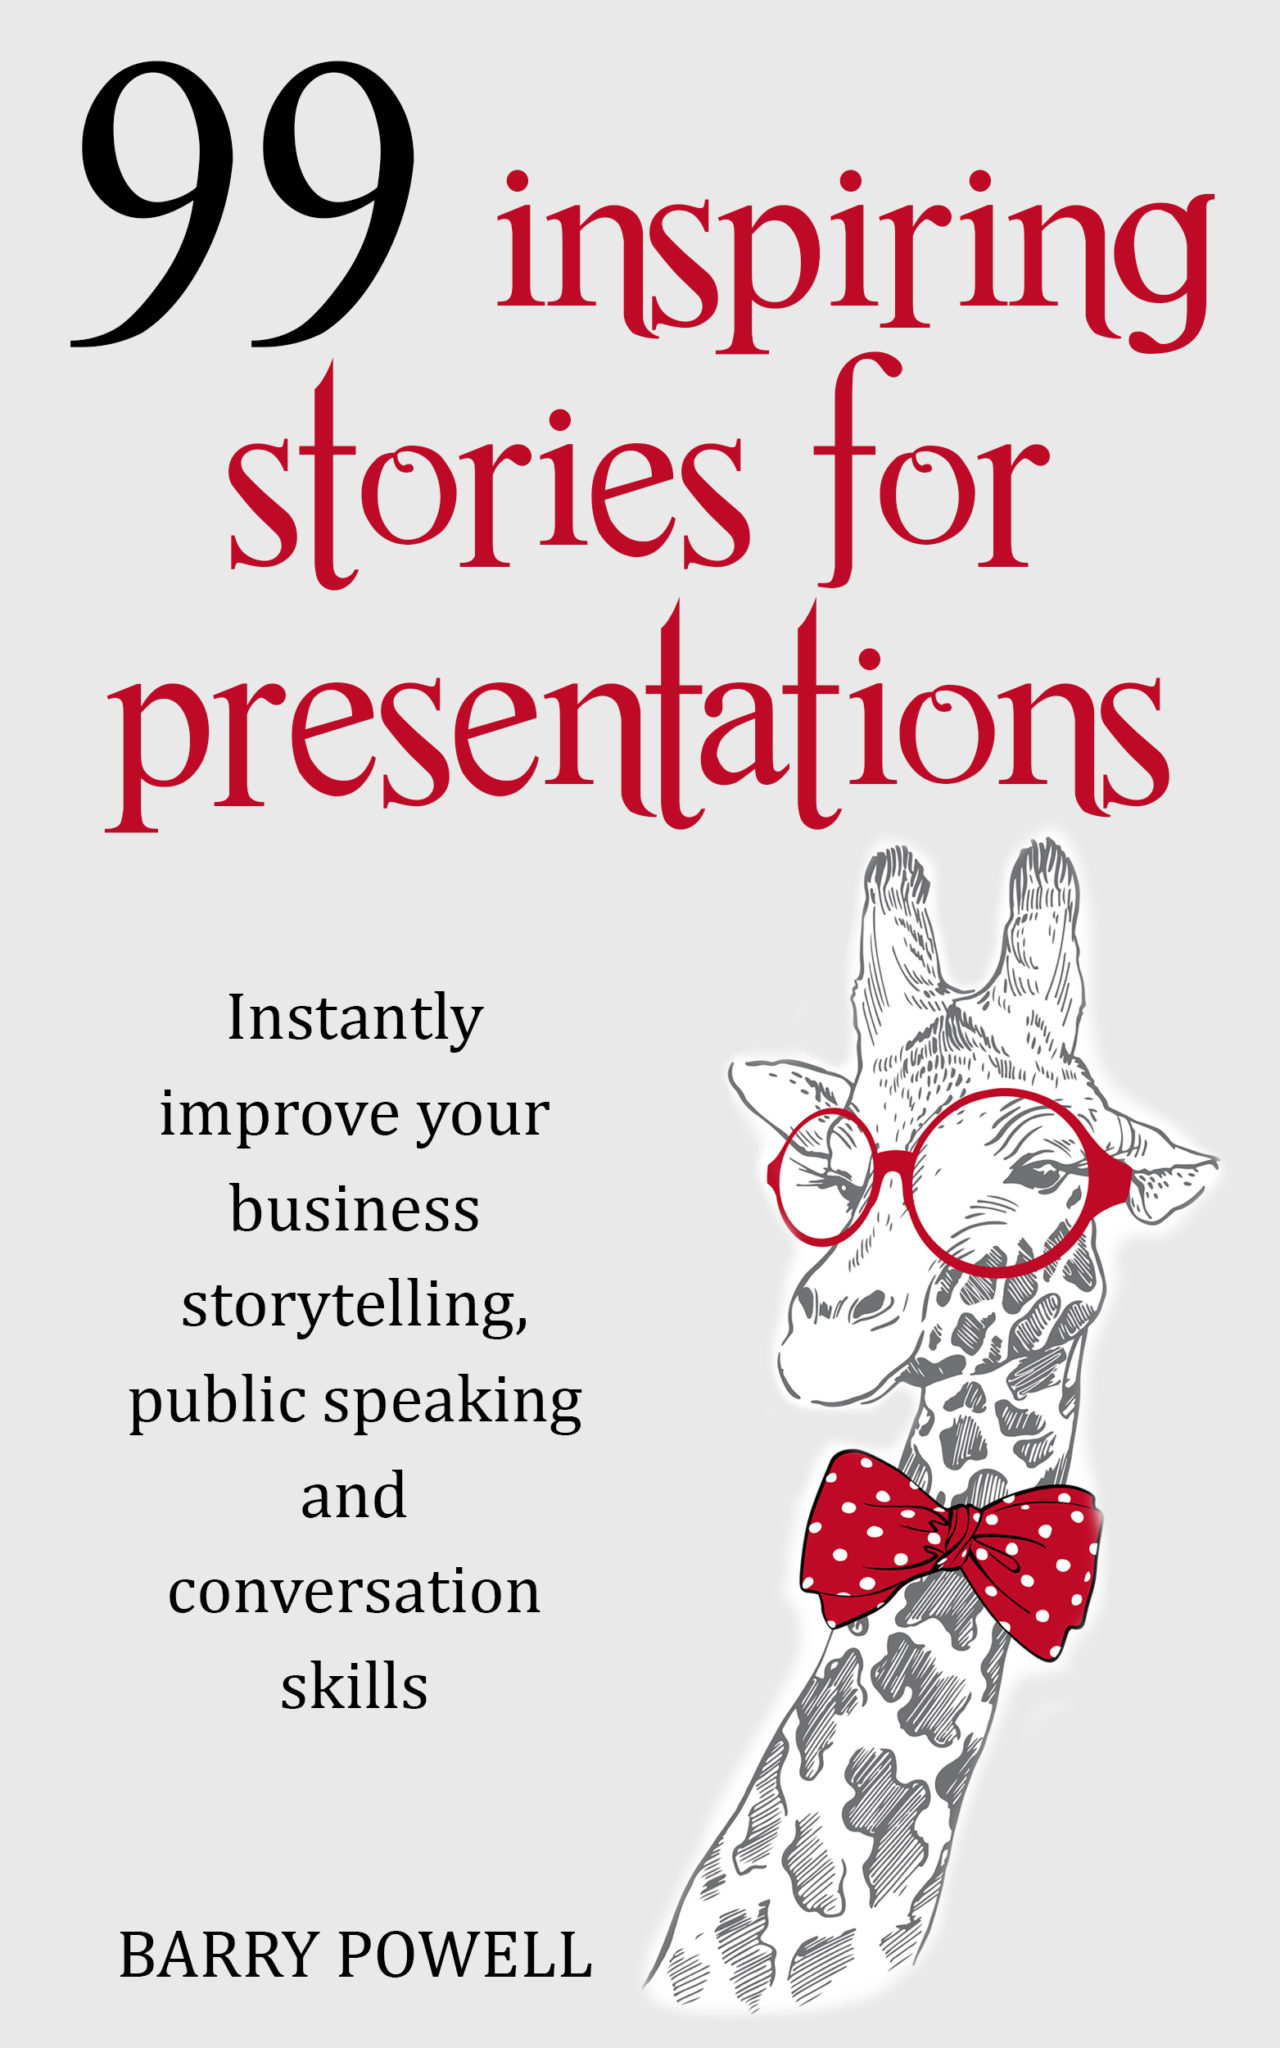 FREE: 99 Inspiring Stories for Presentations: Instantly Improve Your Business Storytelling, Public Speaking and Conversation Skills by Barry Powell